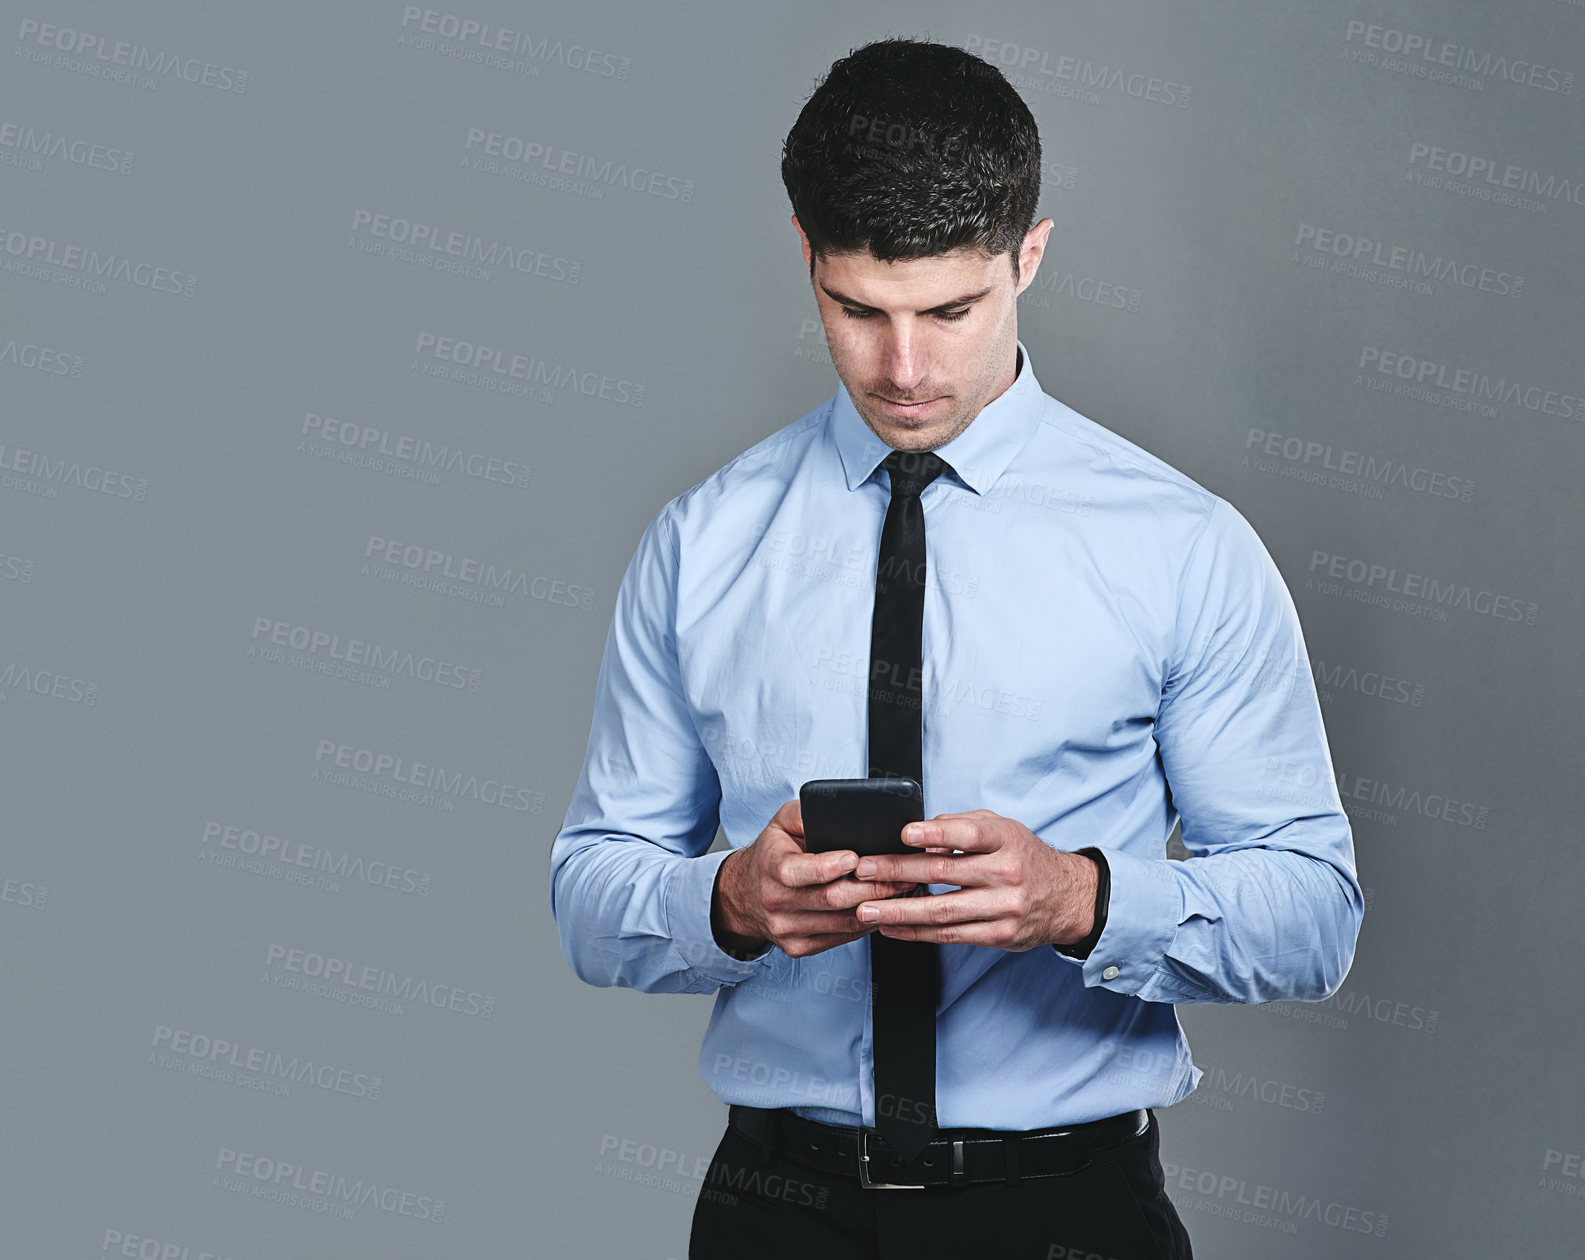 Buy stock photo Studio shot of a young businessman texting on a cellphone against a grey background